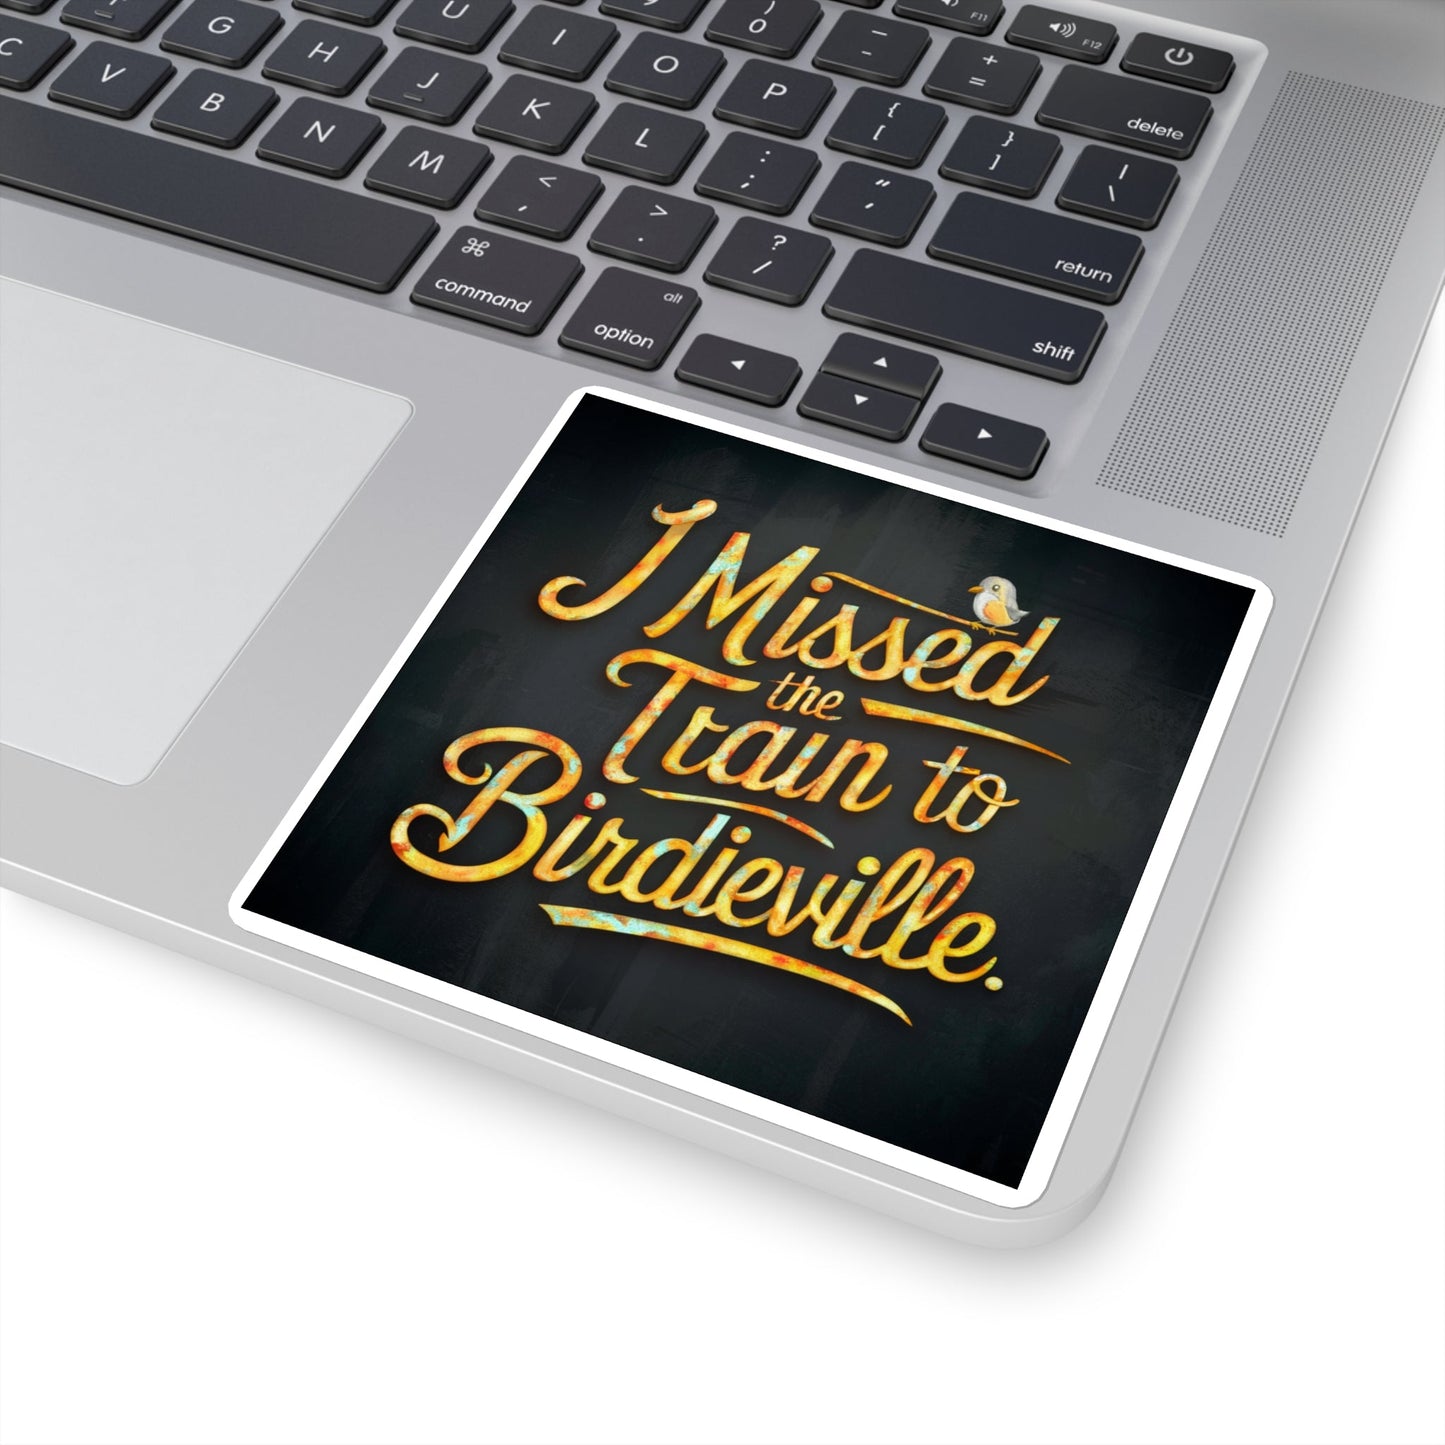 Funny Disc Golf Sticker - I Missed The Train To Birdieville - Square Stickers - Quirky Goodies